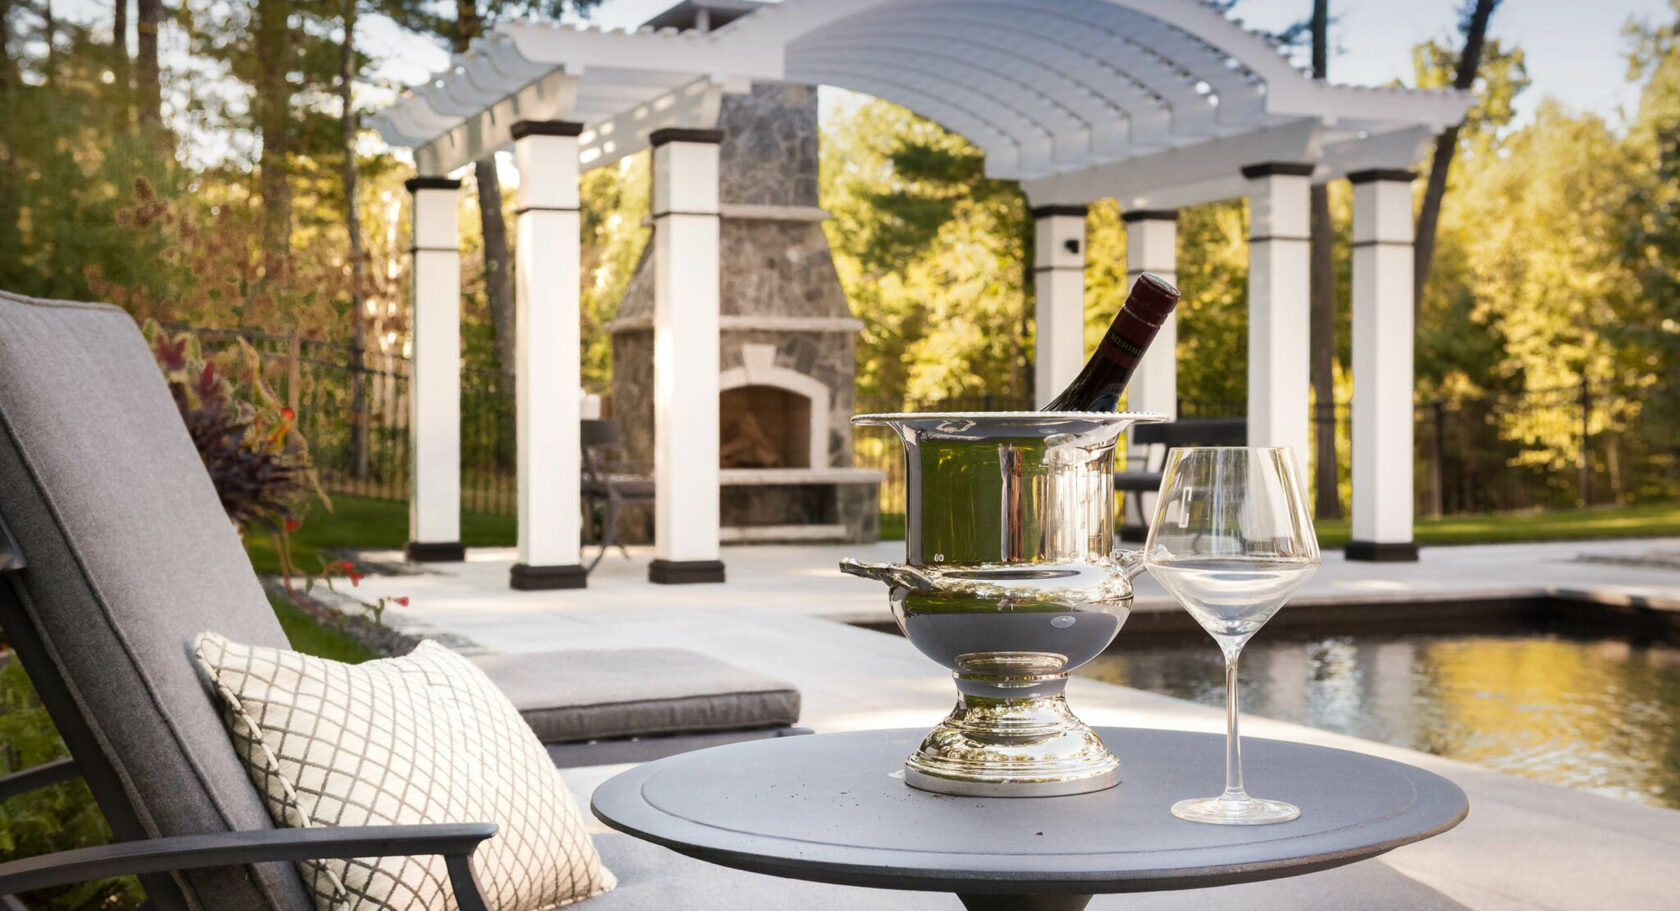 Wine on table next to inground pool with pergola. Dex by Terra design-build project in Massachusetts.